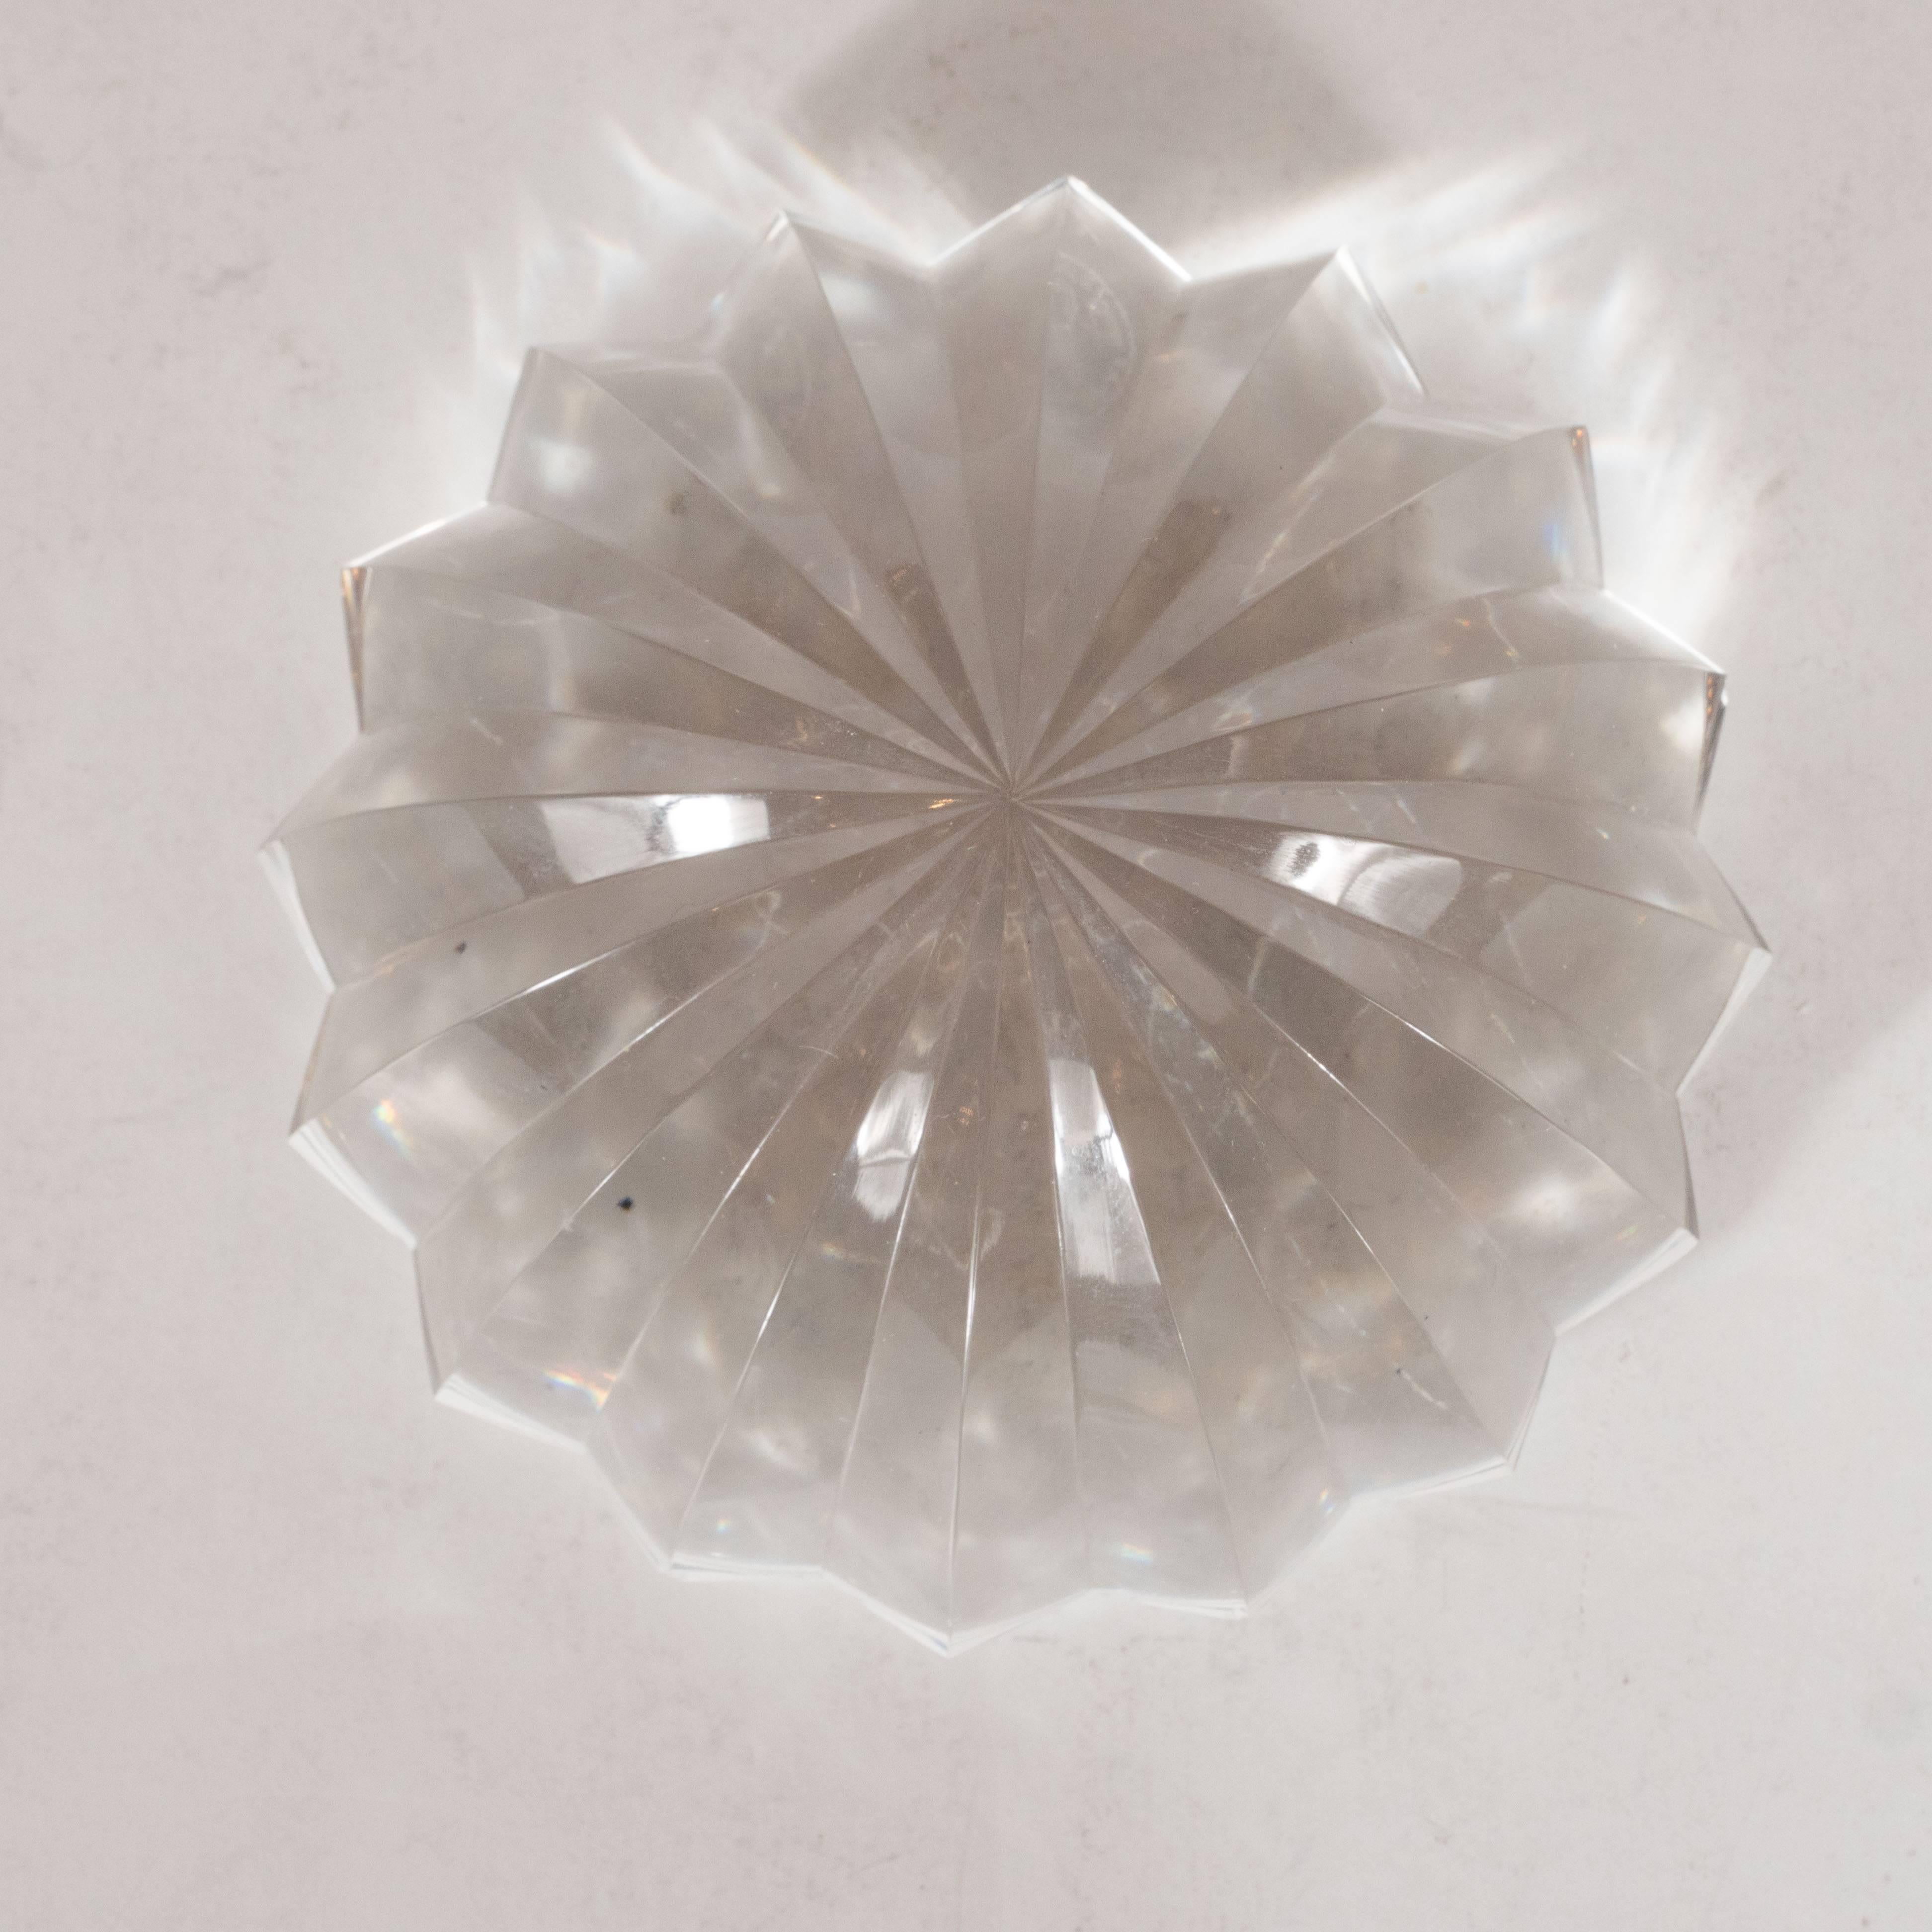 This stunning Mid-Century Modernist paperweight was realized circa 1970 by Baccarat, arguably the world's premiere crystal maker. Resembling a stylized sand dollar, it features an abundance of vaulted channels of cut crystal curving down to the